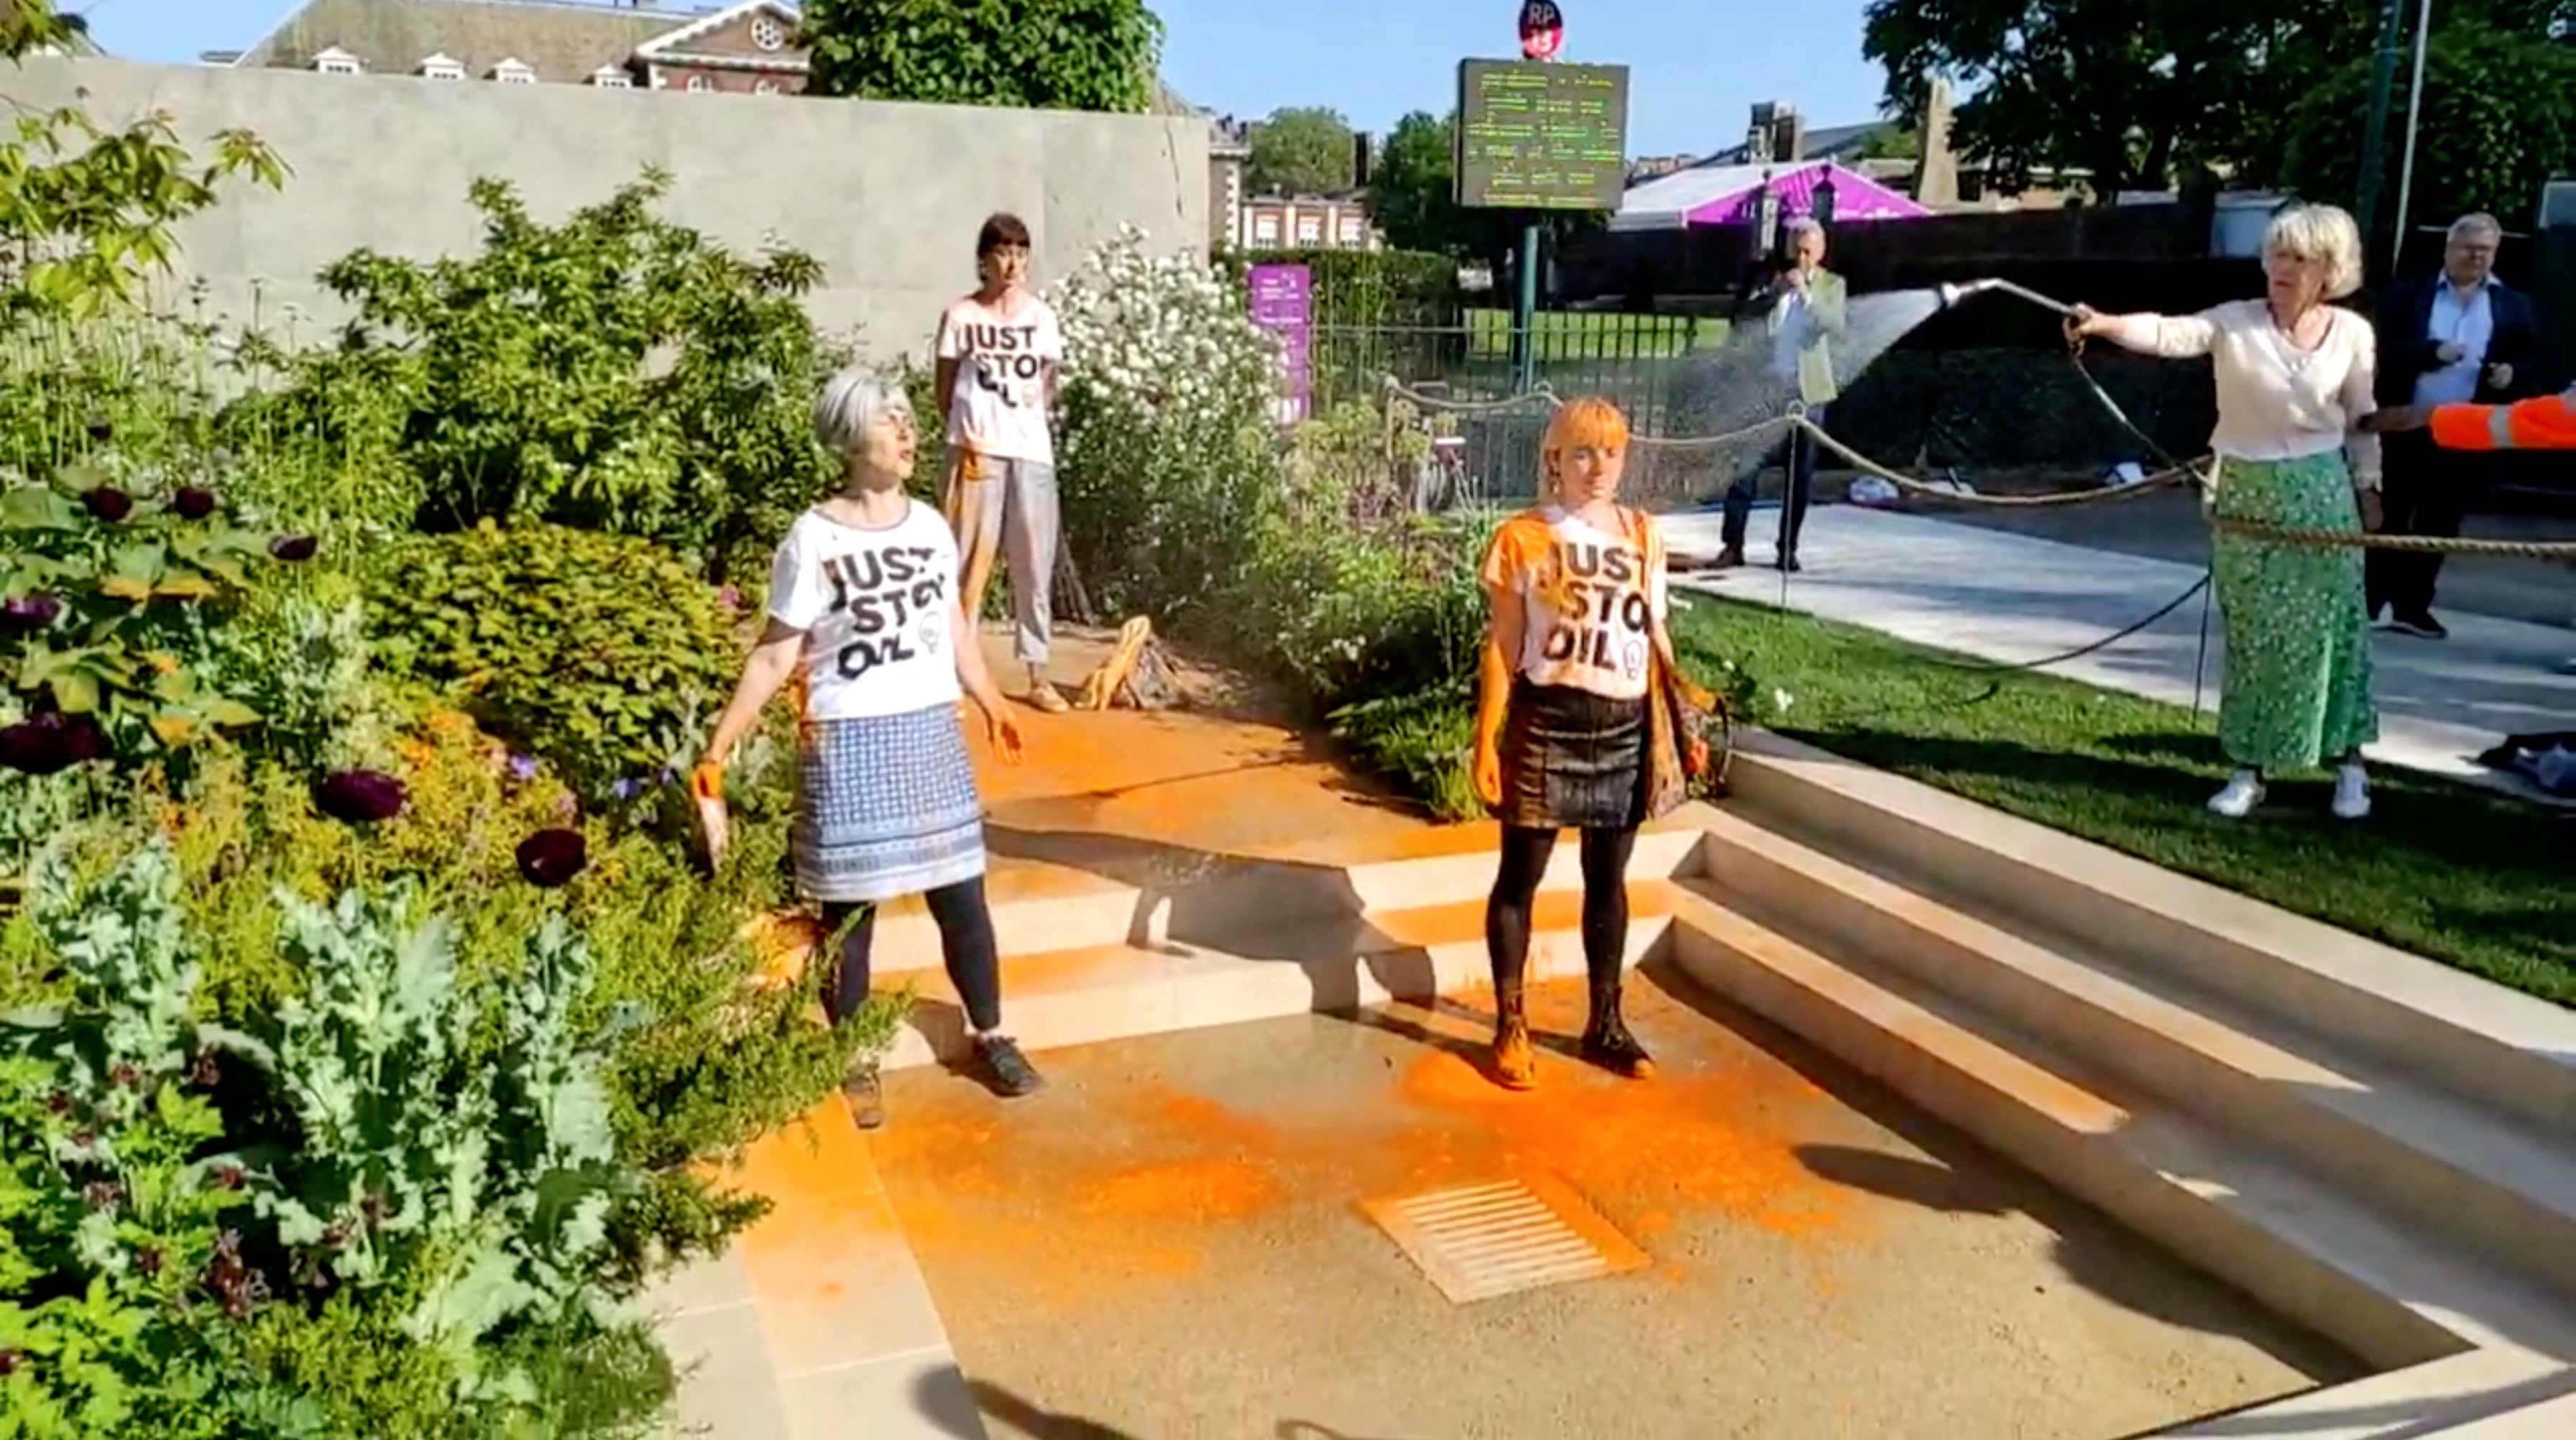 A woman douses Just Stop Oil protesters with water after they throw orange paint over a Chelsea Flower Show exhibit in London